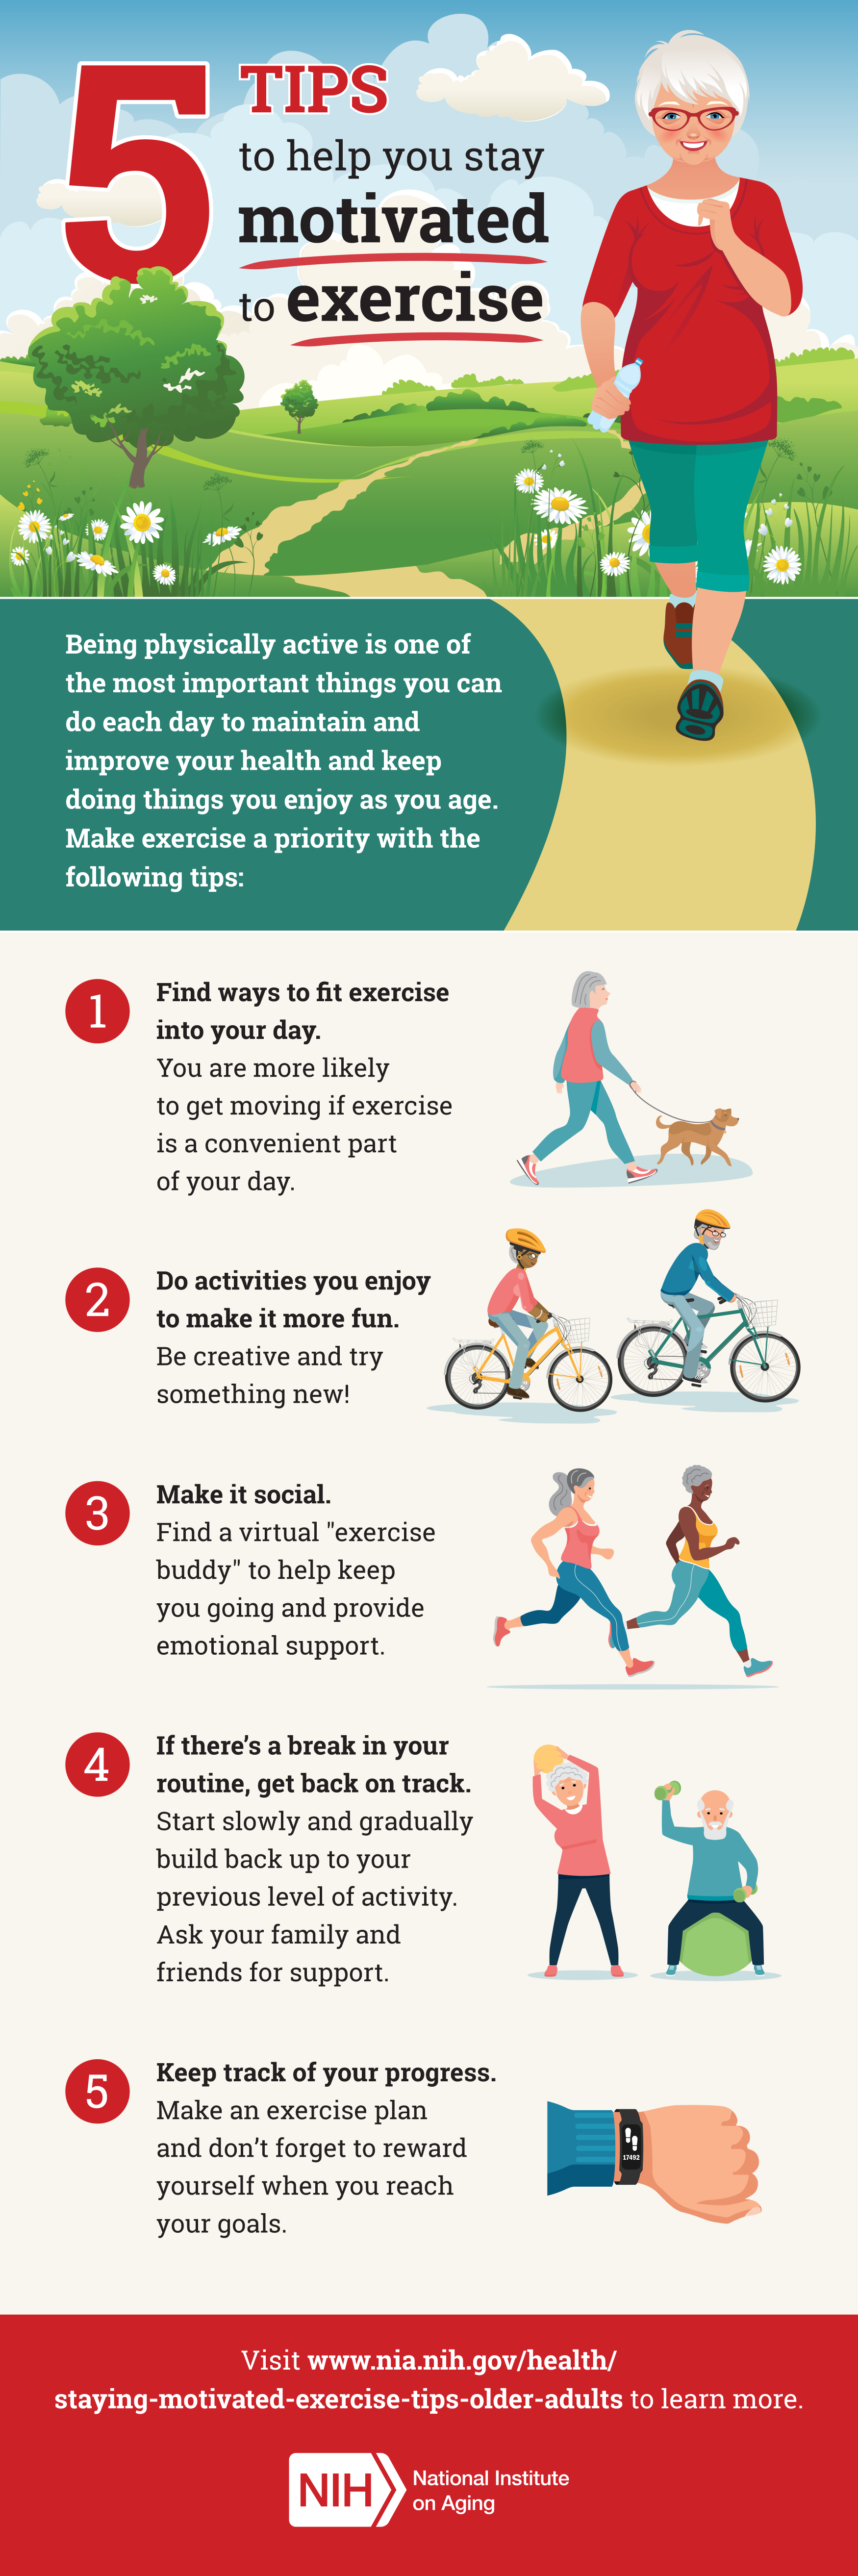 5 Tips to Help You Stay Motivated to Exercise | National Institute on Aging